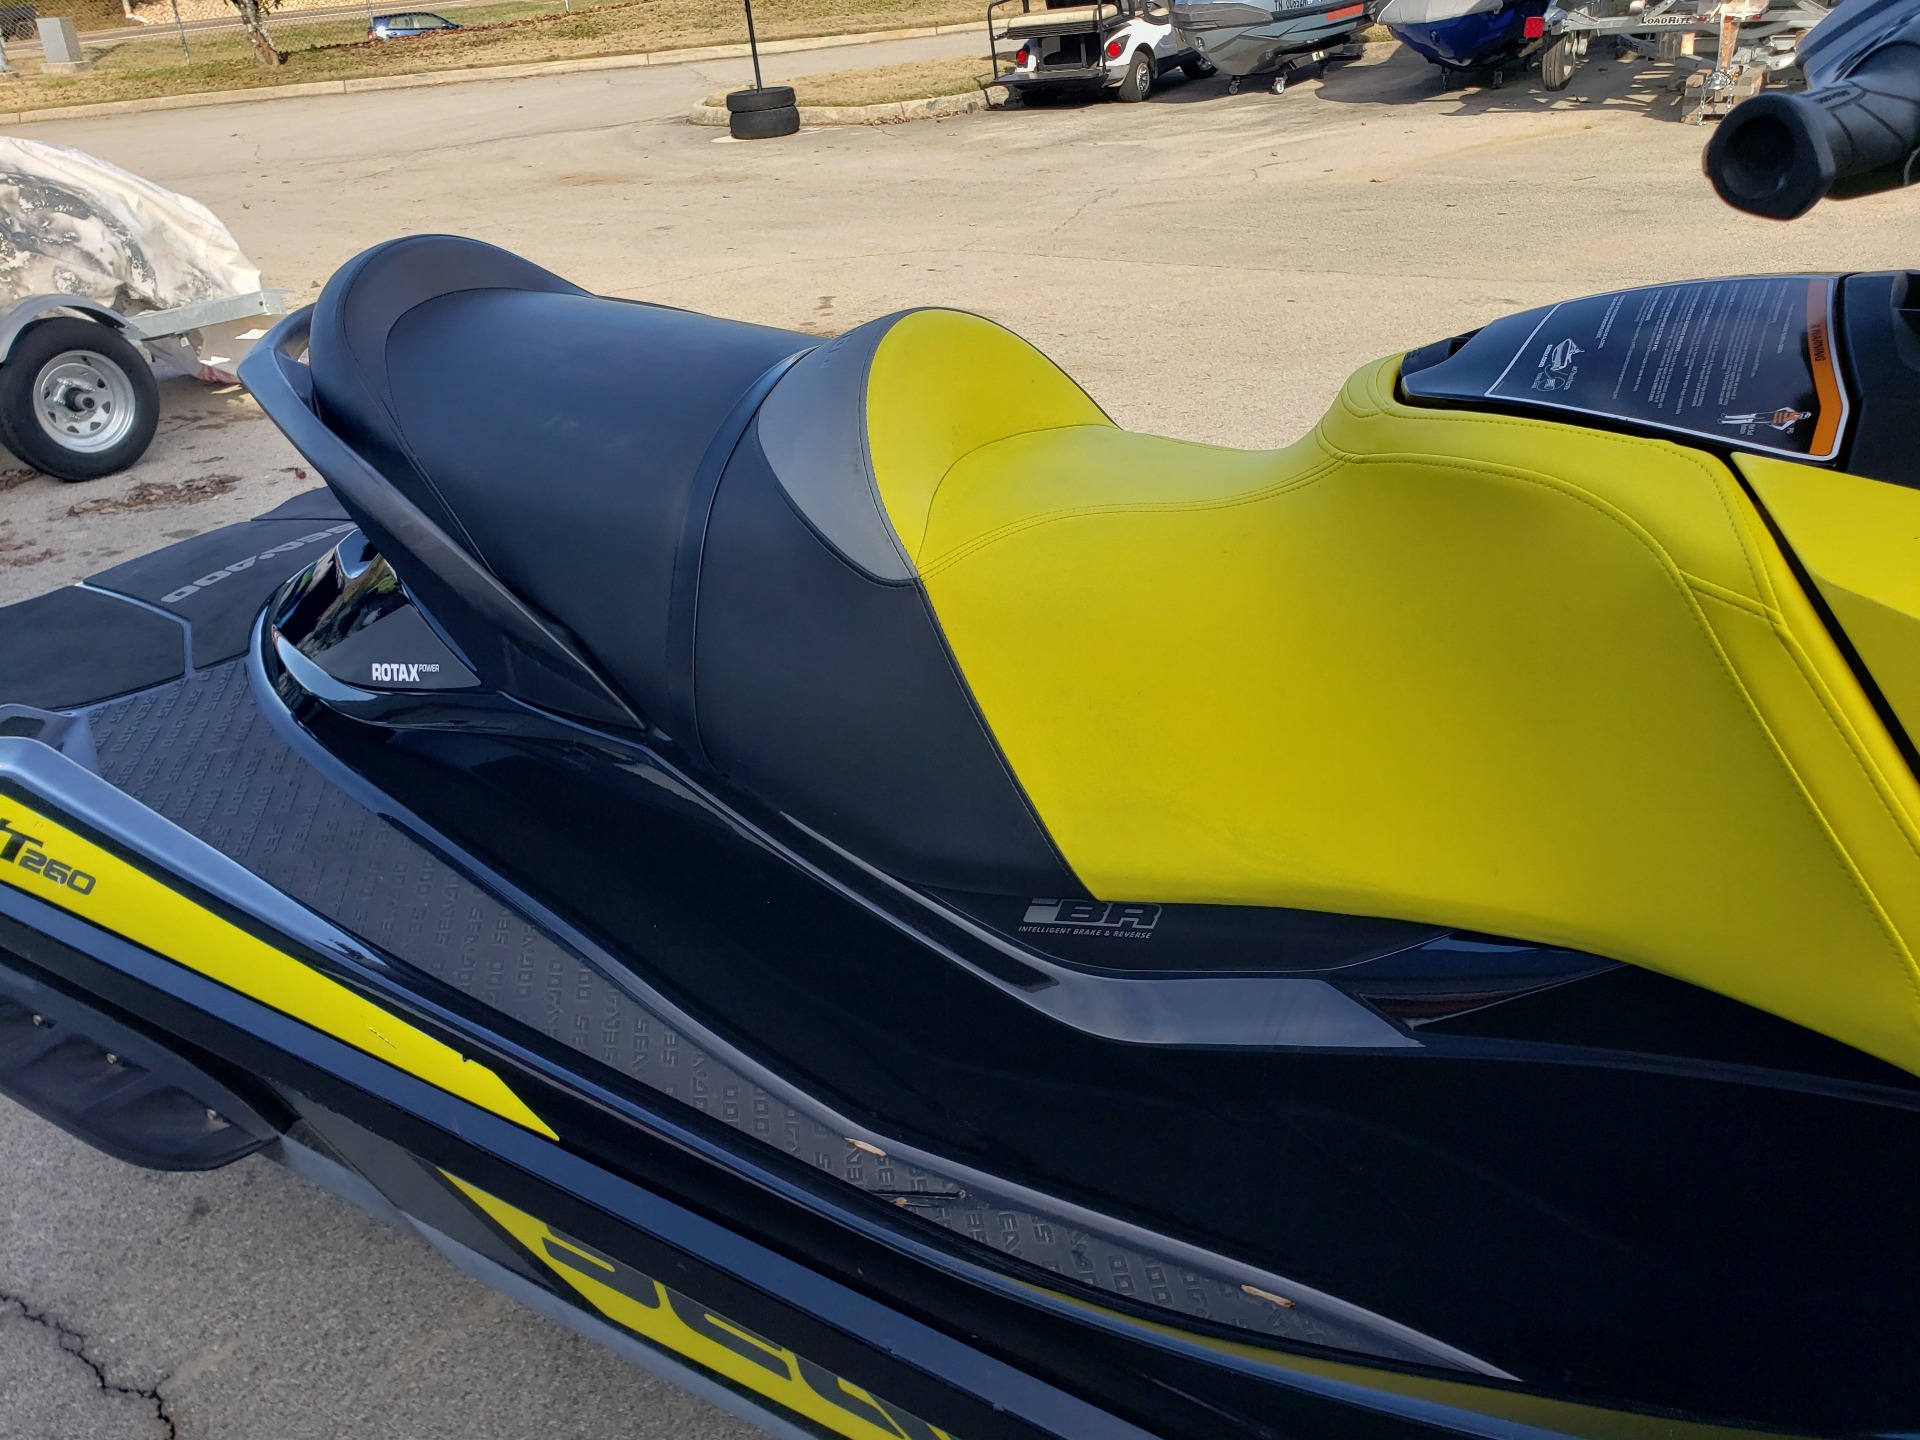 2016 Sea-Doo RXT 260 in Louisville, Tennessee - Photo 6